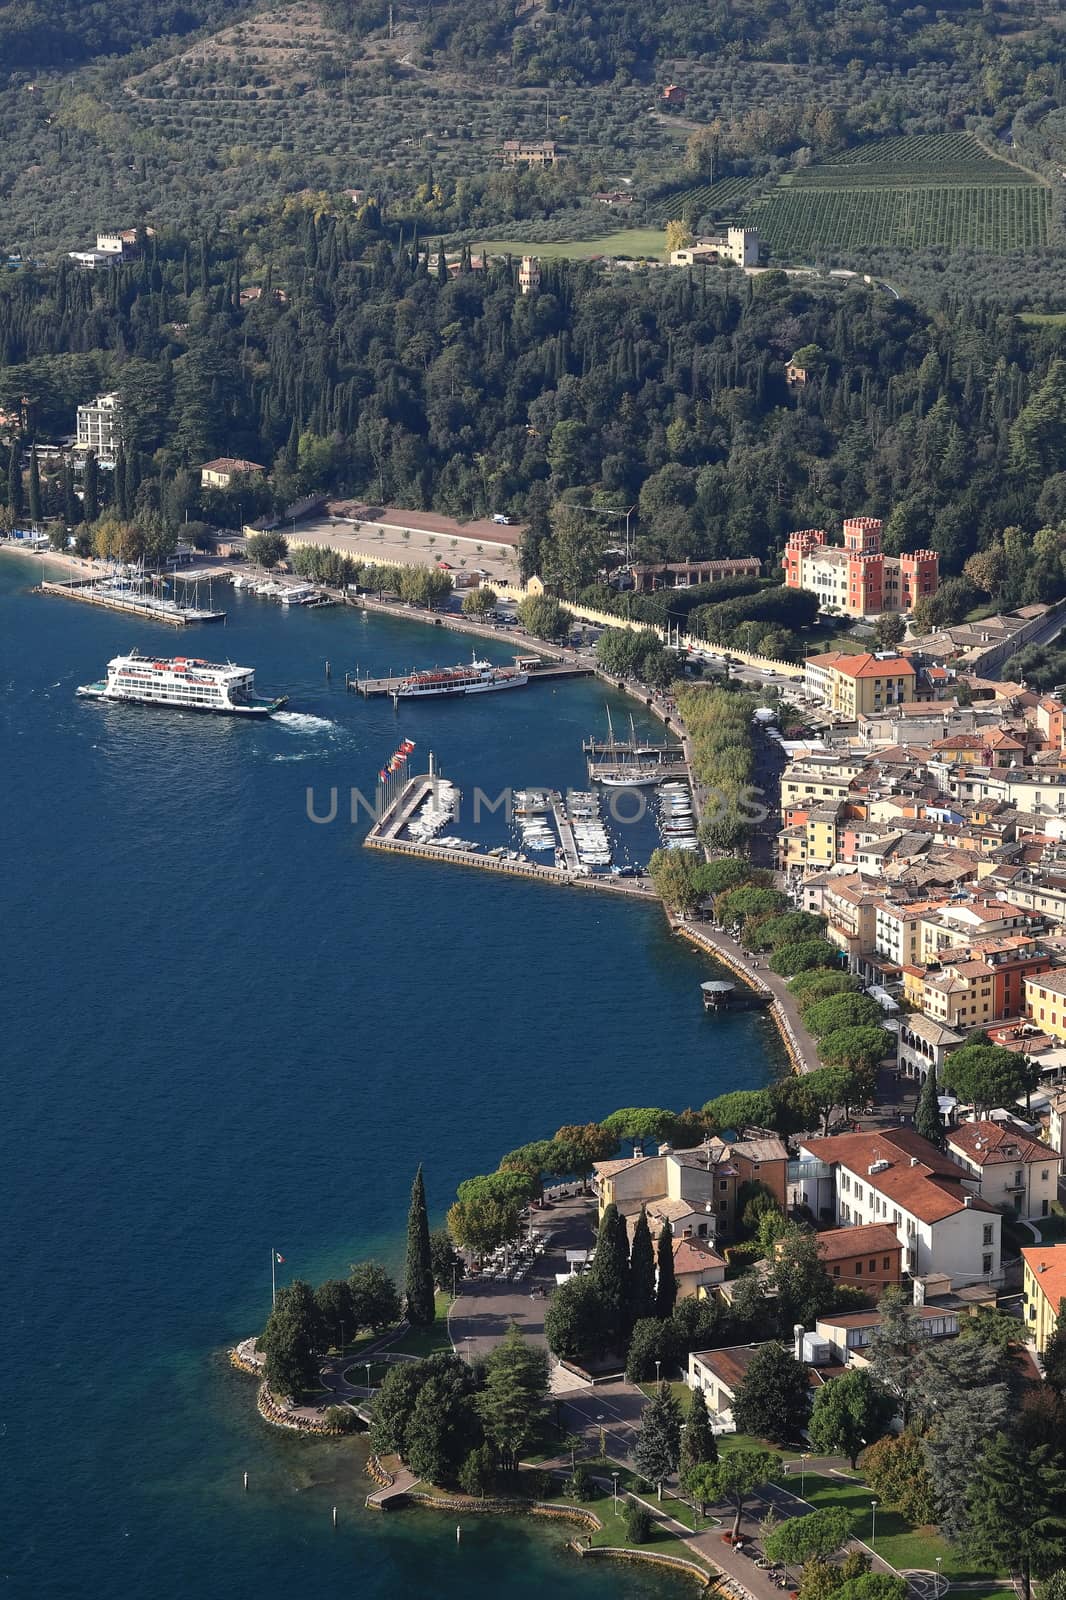 The view from Rocca across the town of Garda as a ferry departs the waterfront.  Garda is a town on the edge of Lake Garda in North East Italy and Rocca is a hill overlooking the town.